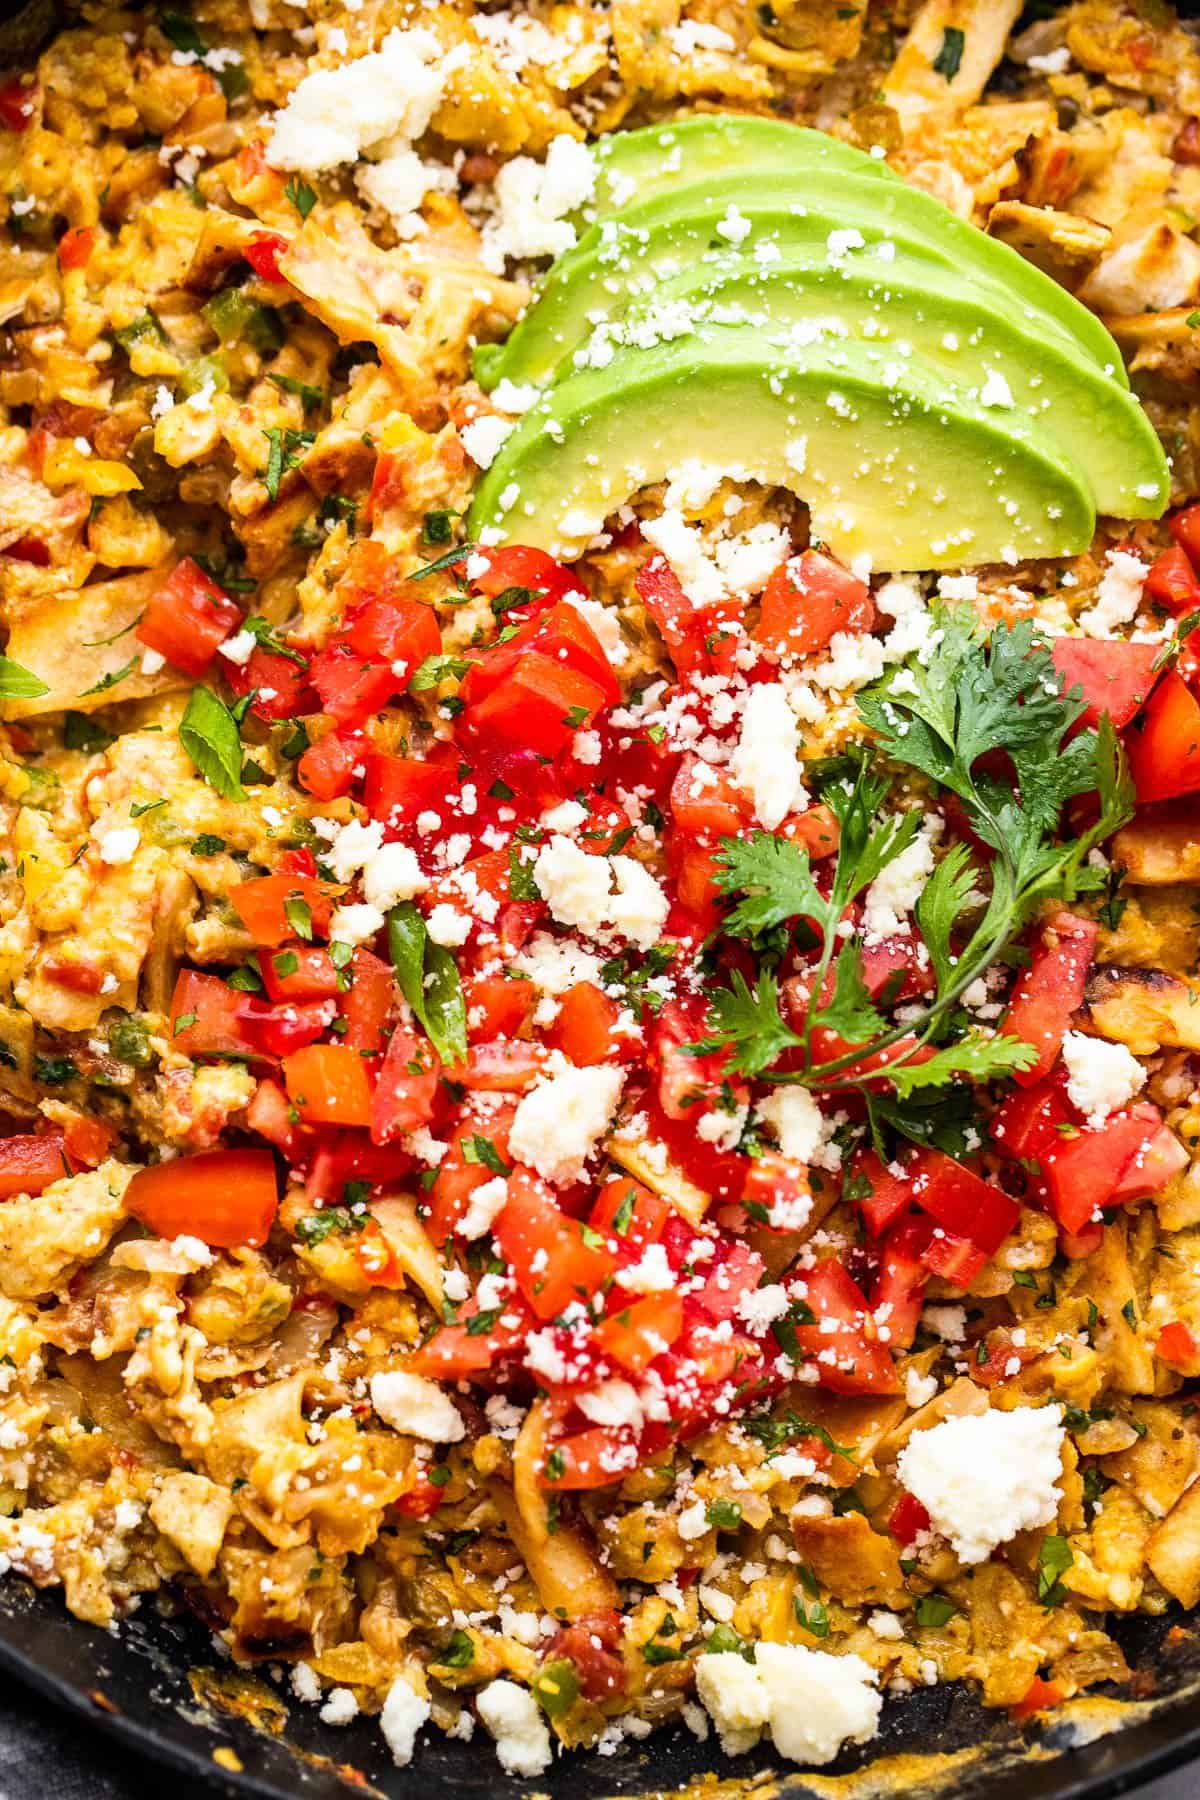 skillet with scrambled eggs, sliced avocados, diced tomatoes, and crumbled cotija cheese